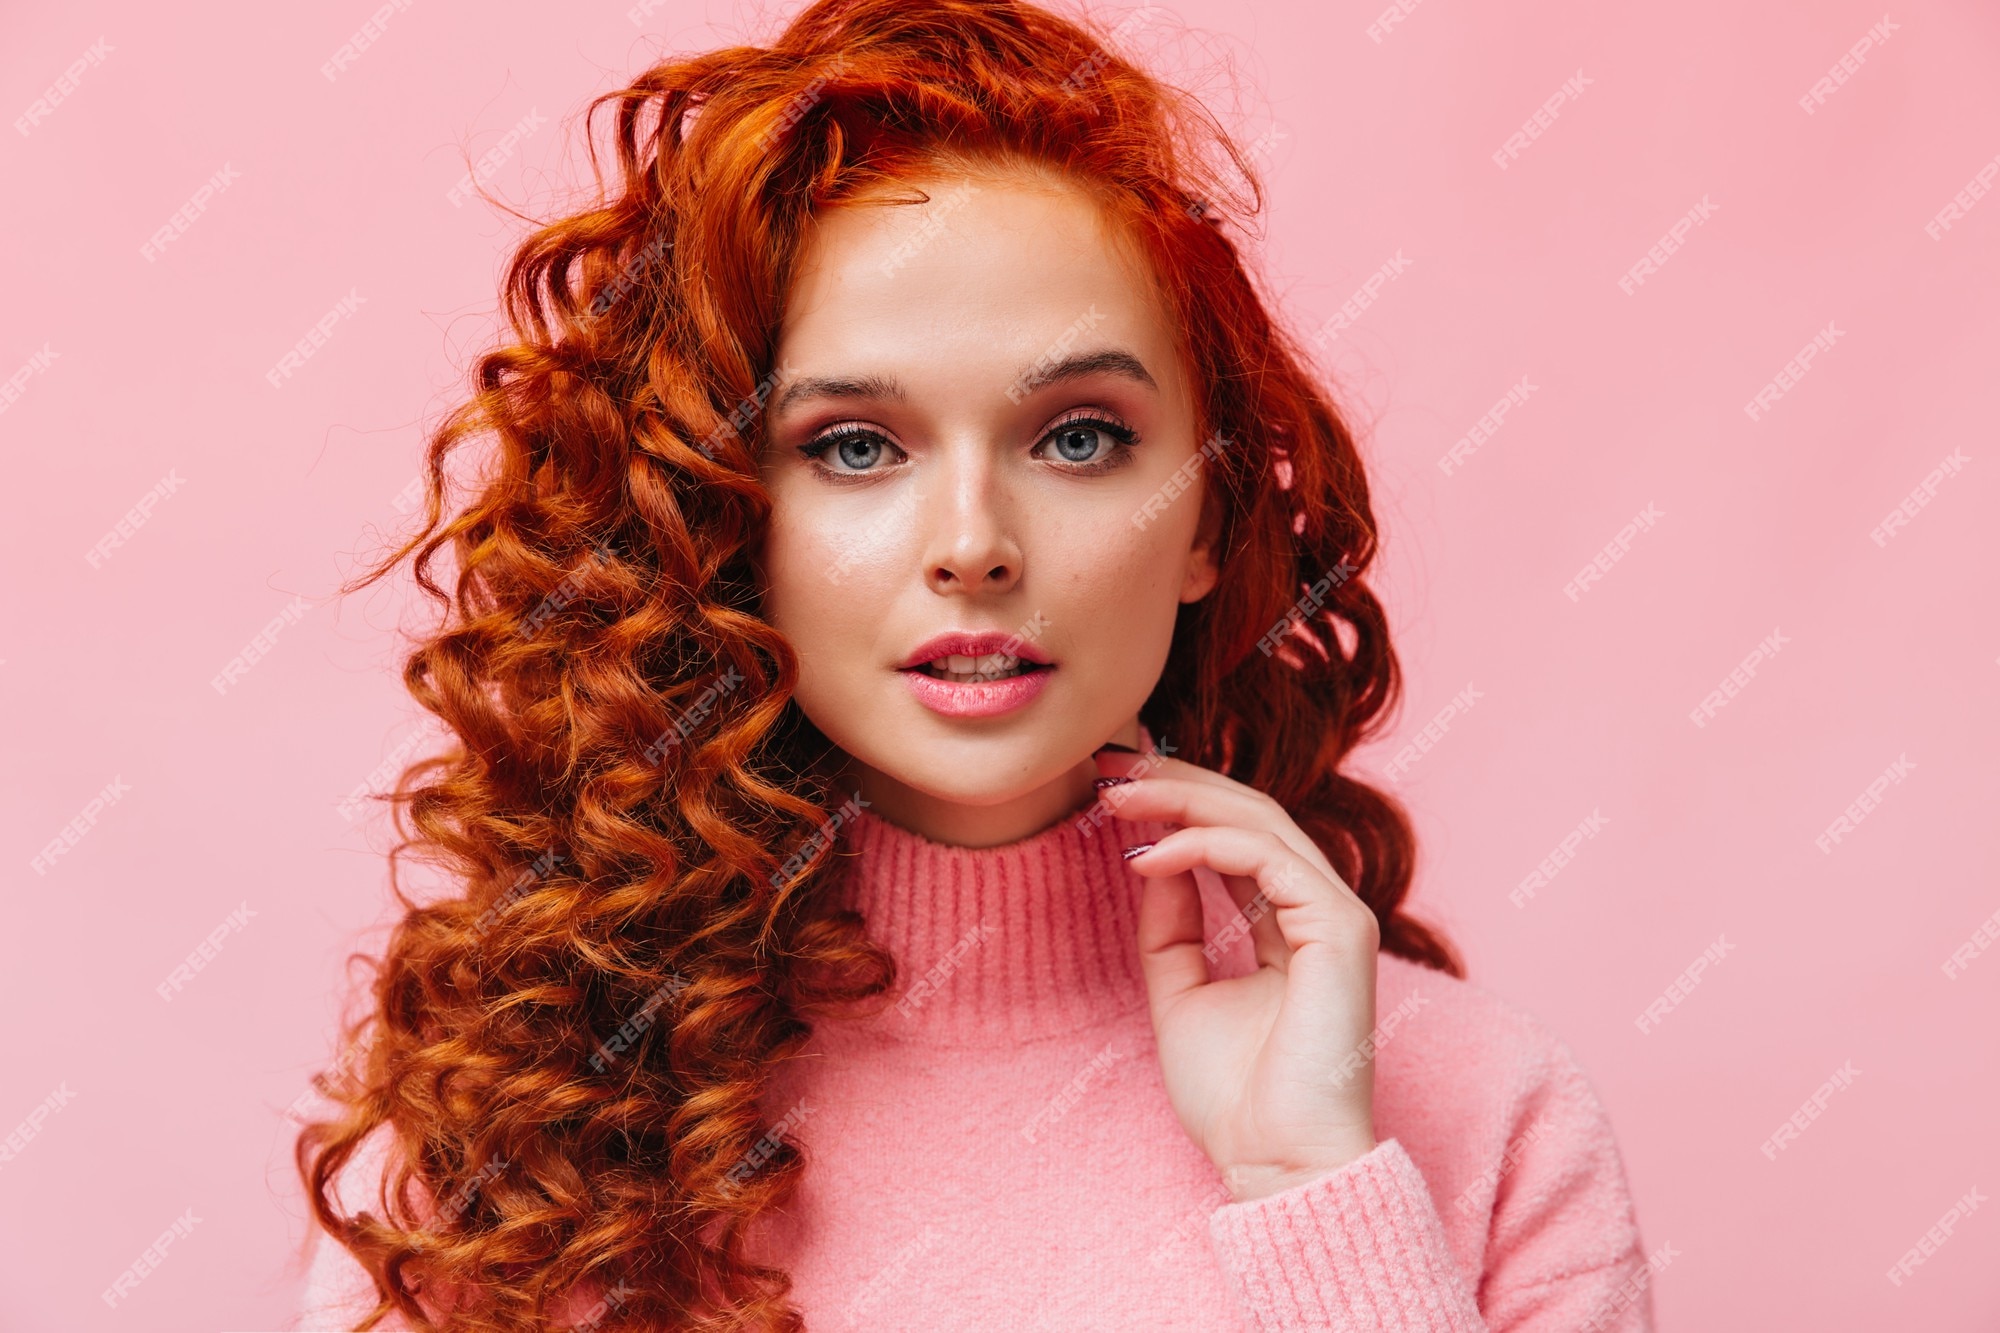 Red hair Images | Free Vectors, Stock Photos & PSD